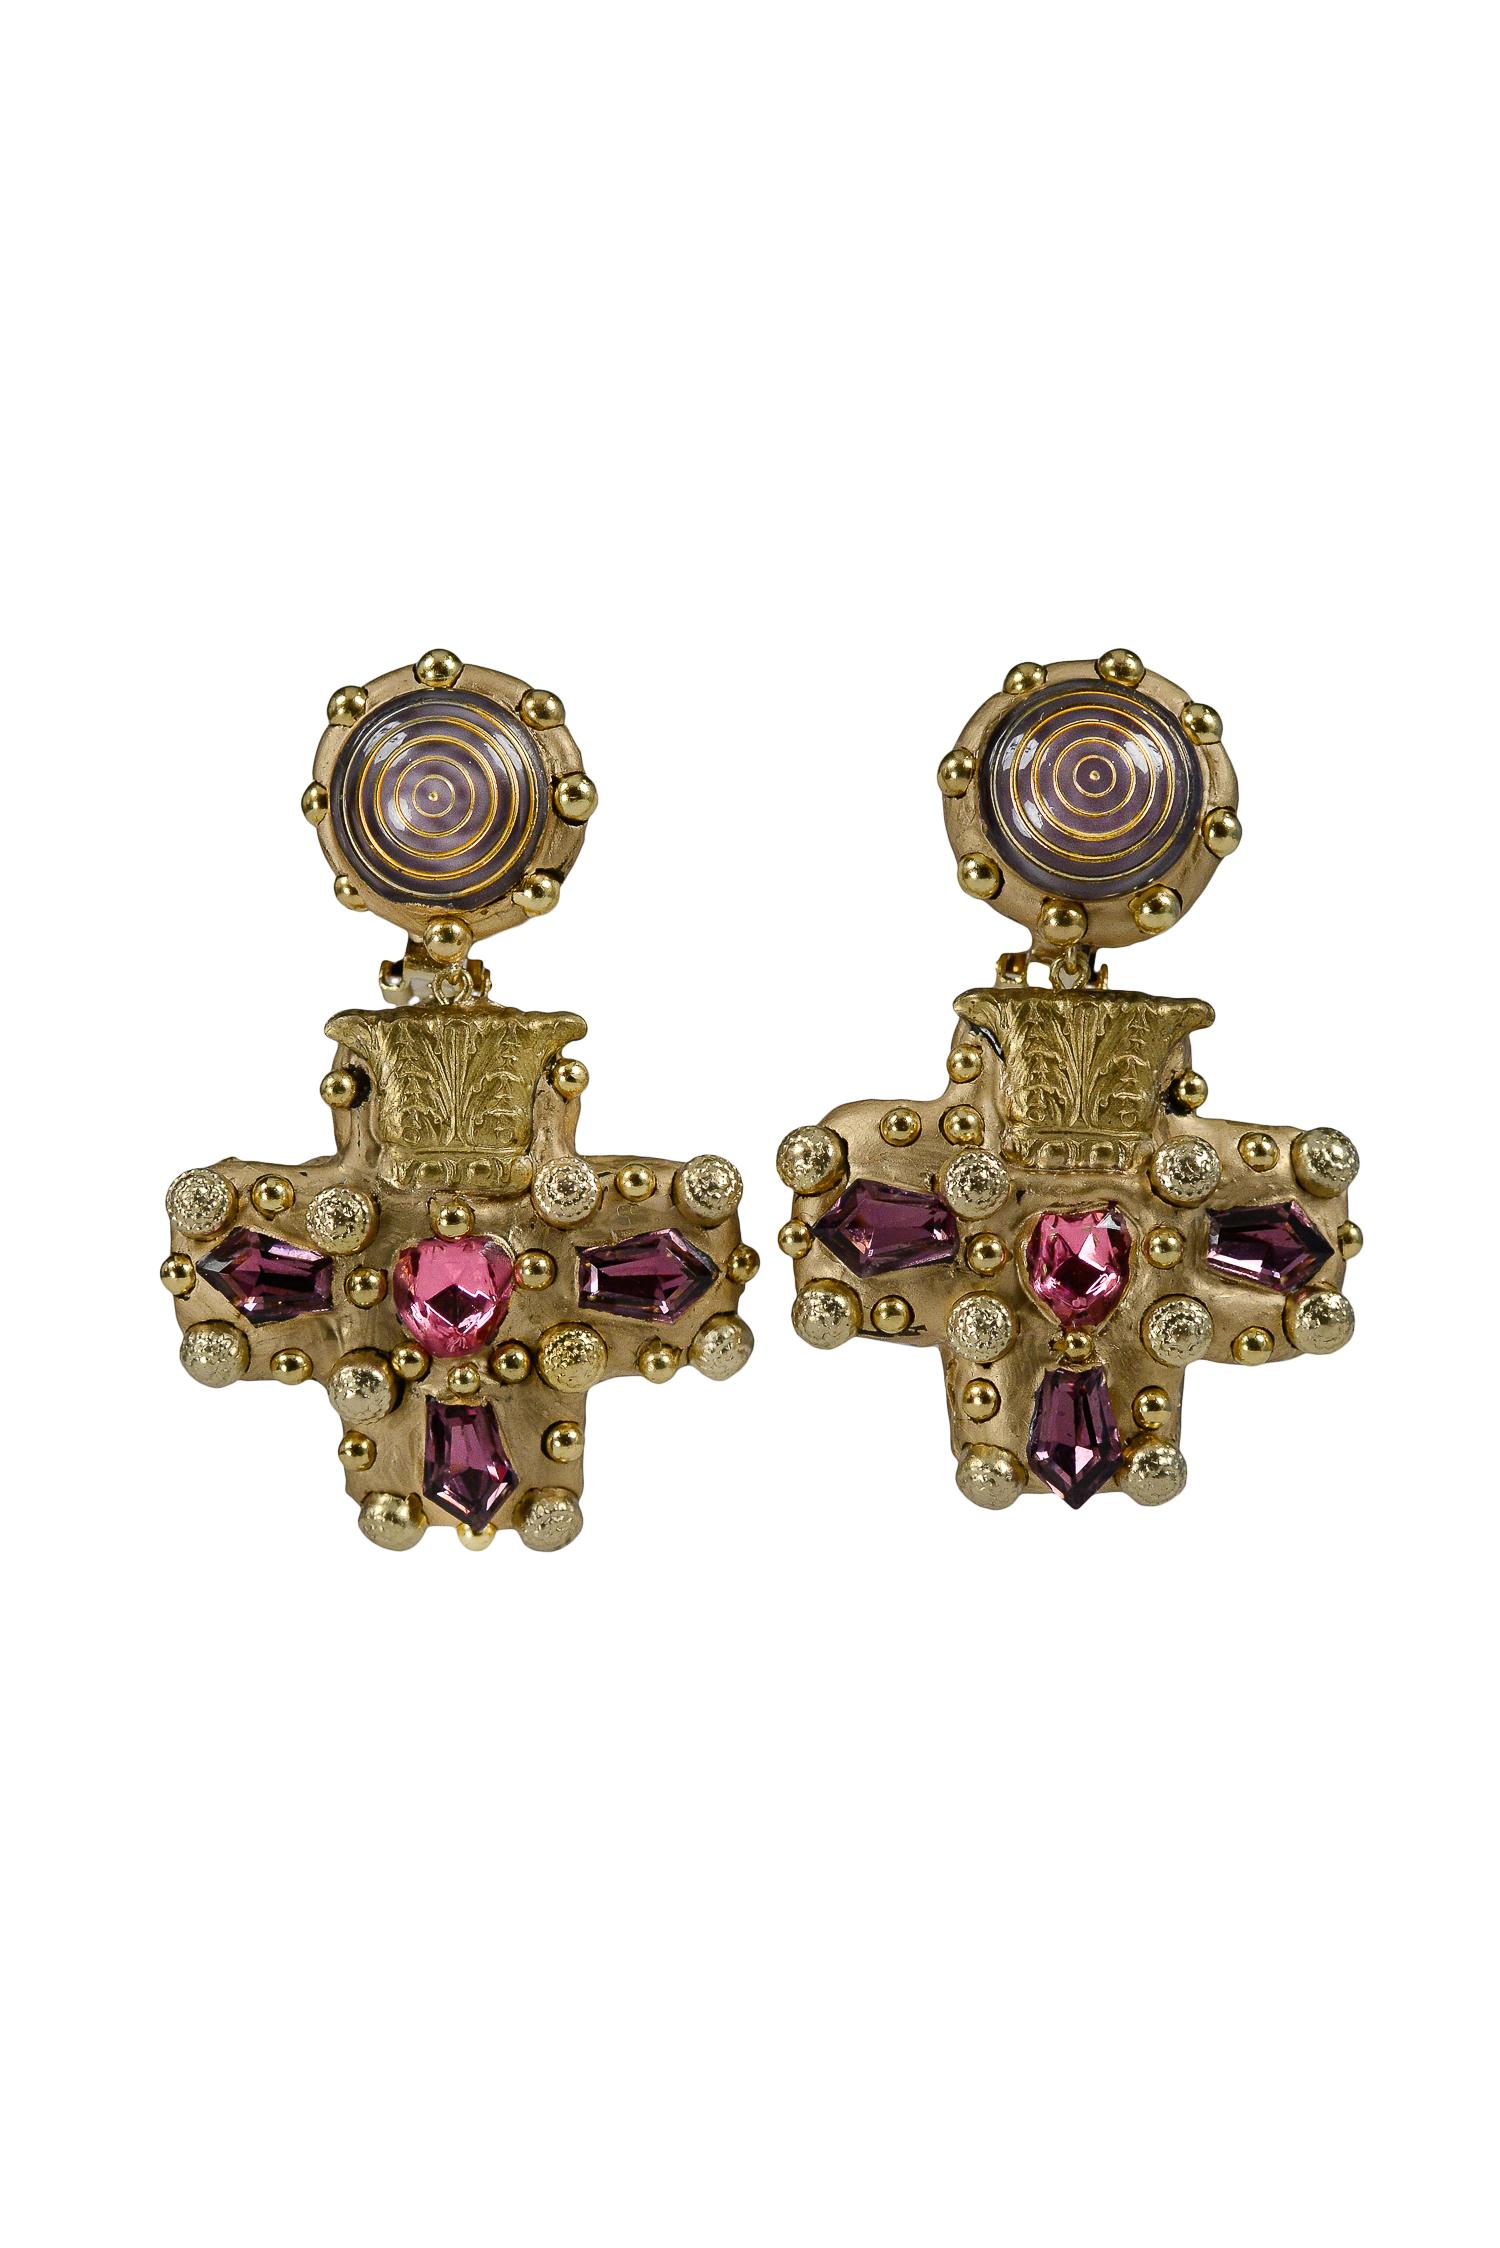 Handmade and one-of-a-kind- Richard Minadeo purple and pink gemstone cross earrings with glass purple and gold swirl set in gold-tone resin with gold studs.

We are pleased to announce Resurrected: Richard Minadeo and the art of Memento Mori: 1980’s